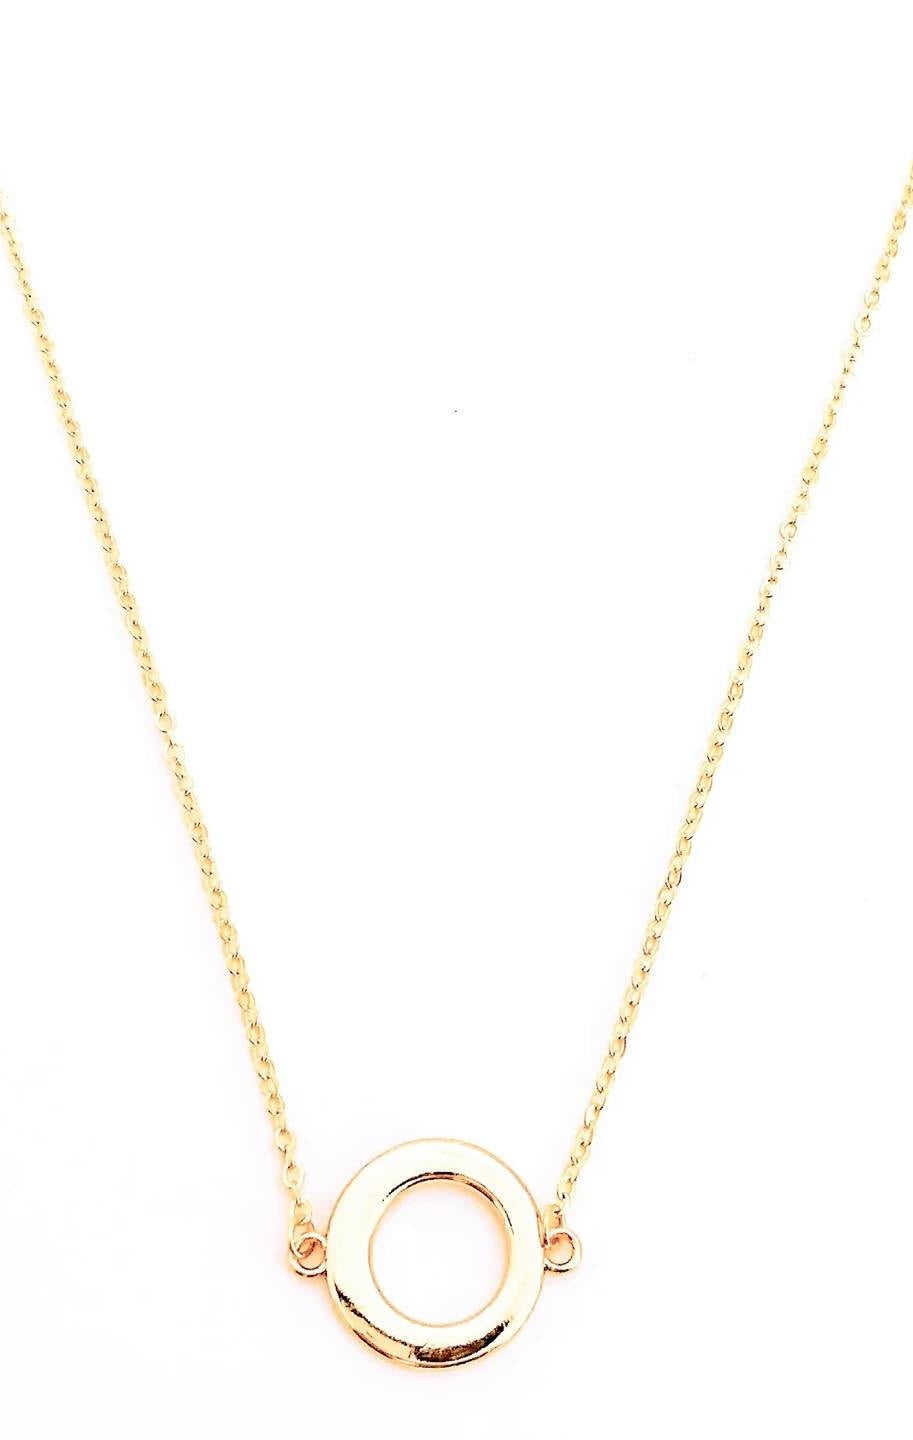 Meeka necklace From the live to give collection